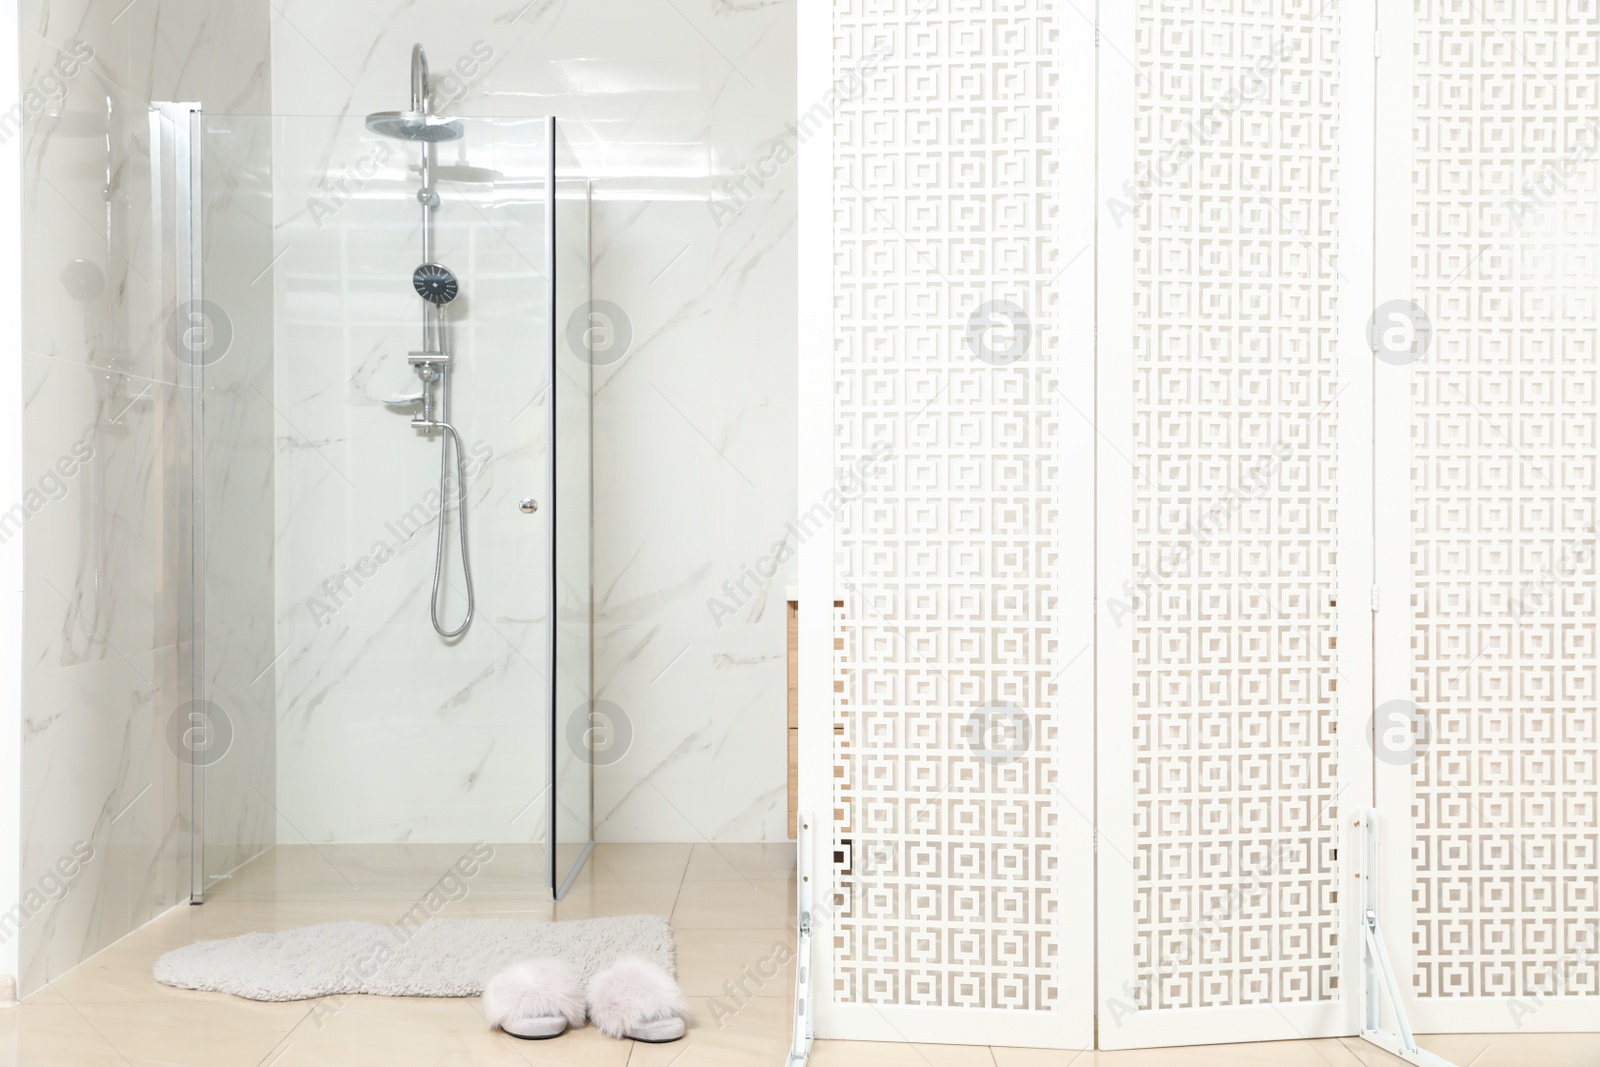 Photo of Modern bathroom interior with shower stall and folding screen